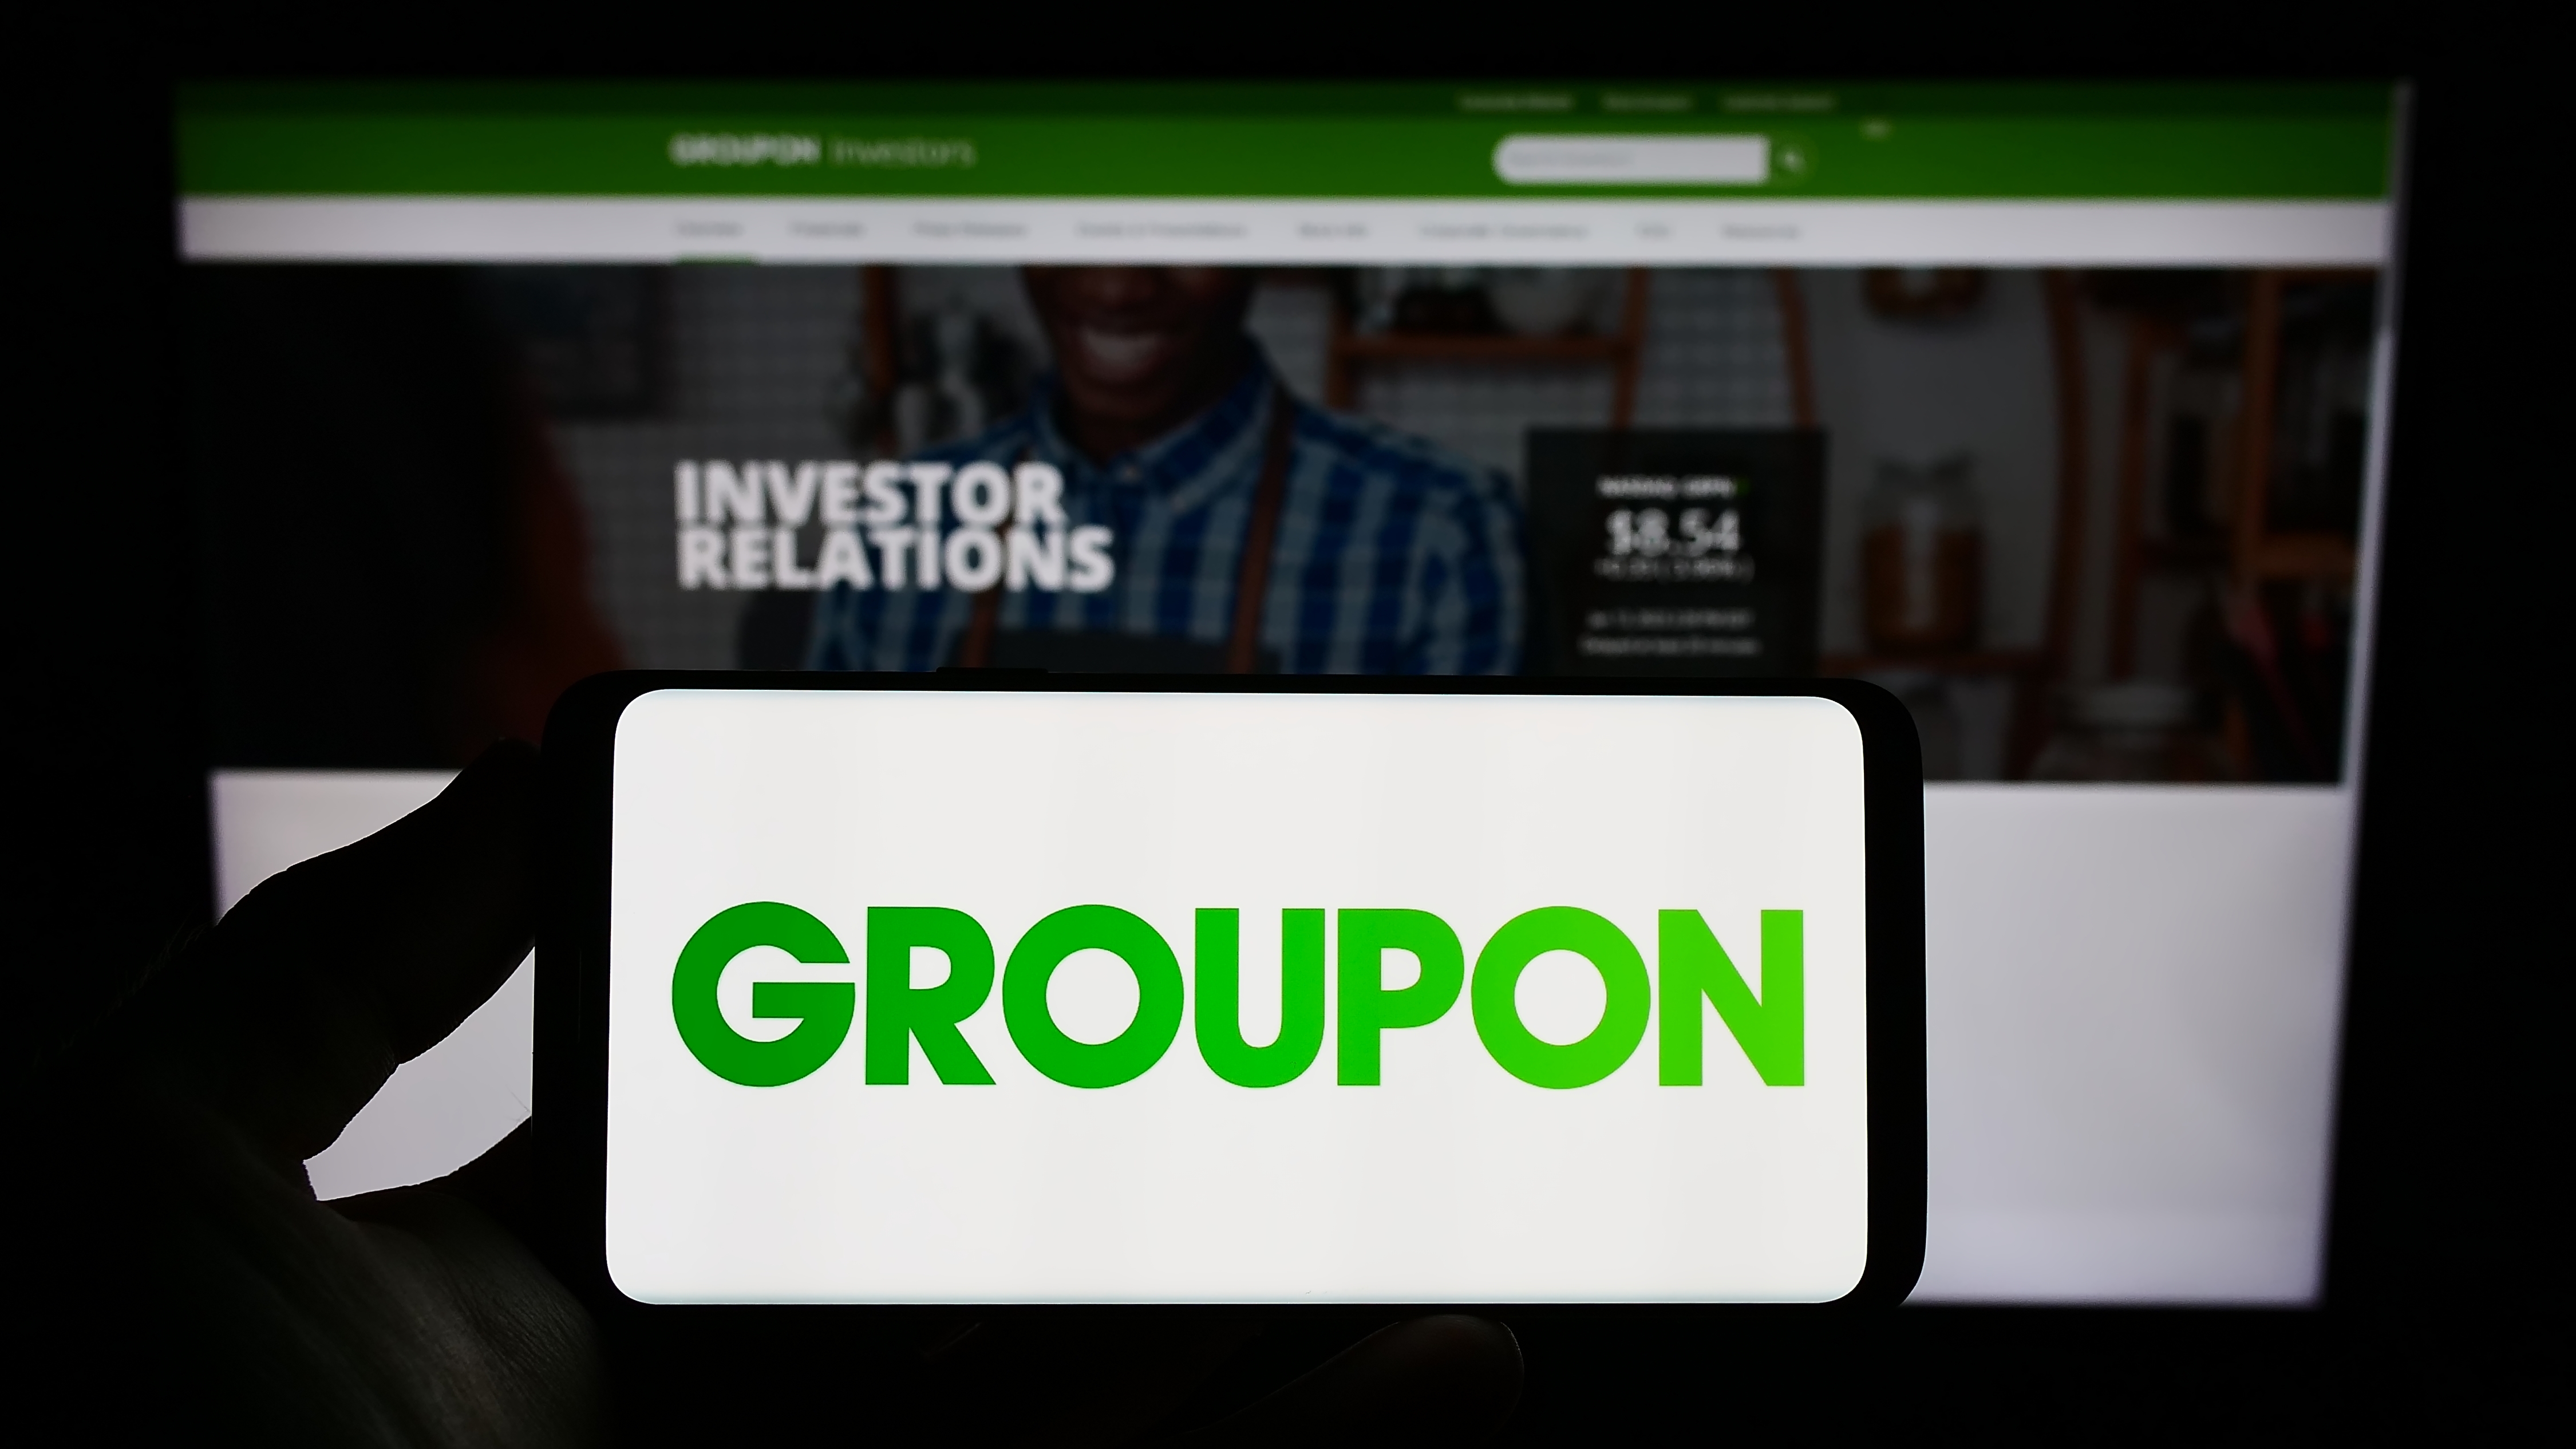 The sharp monthly increase in Groupon (GRPN) stock points to an impending positive turnaround